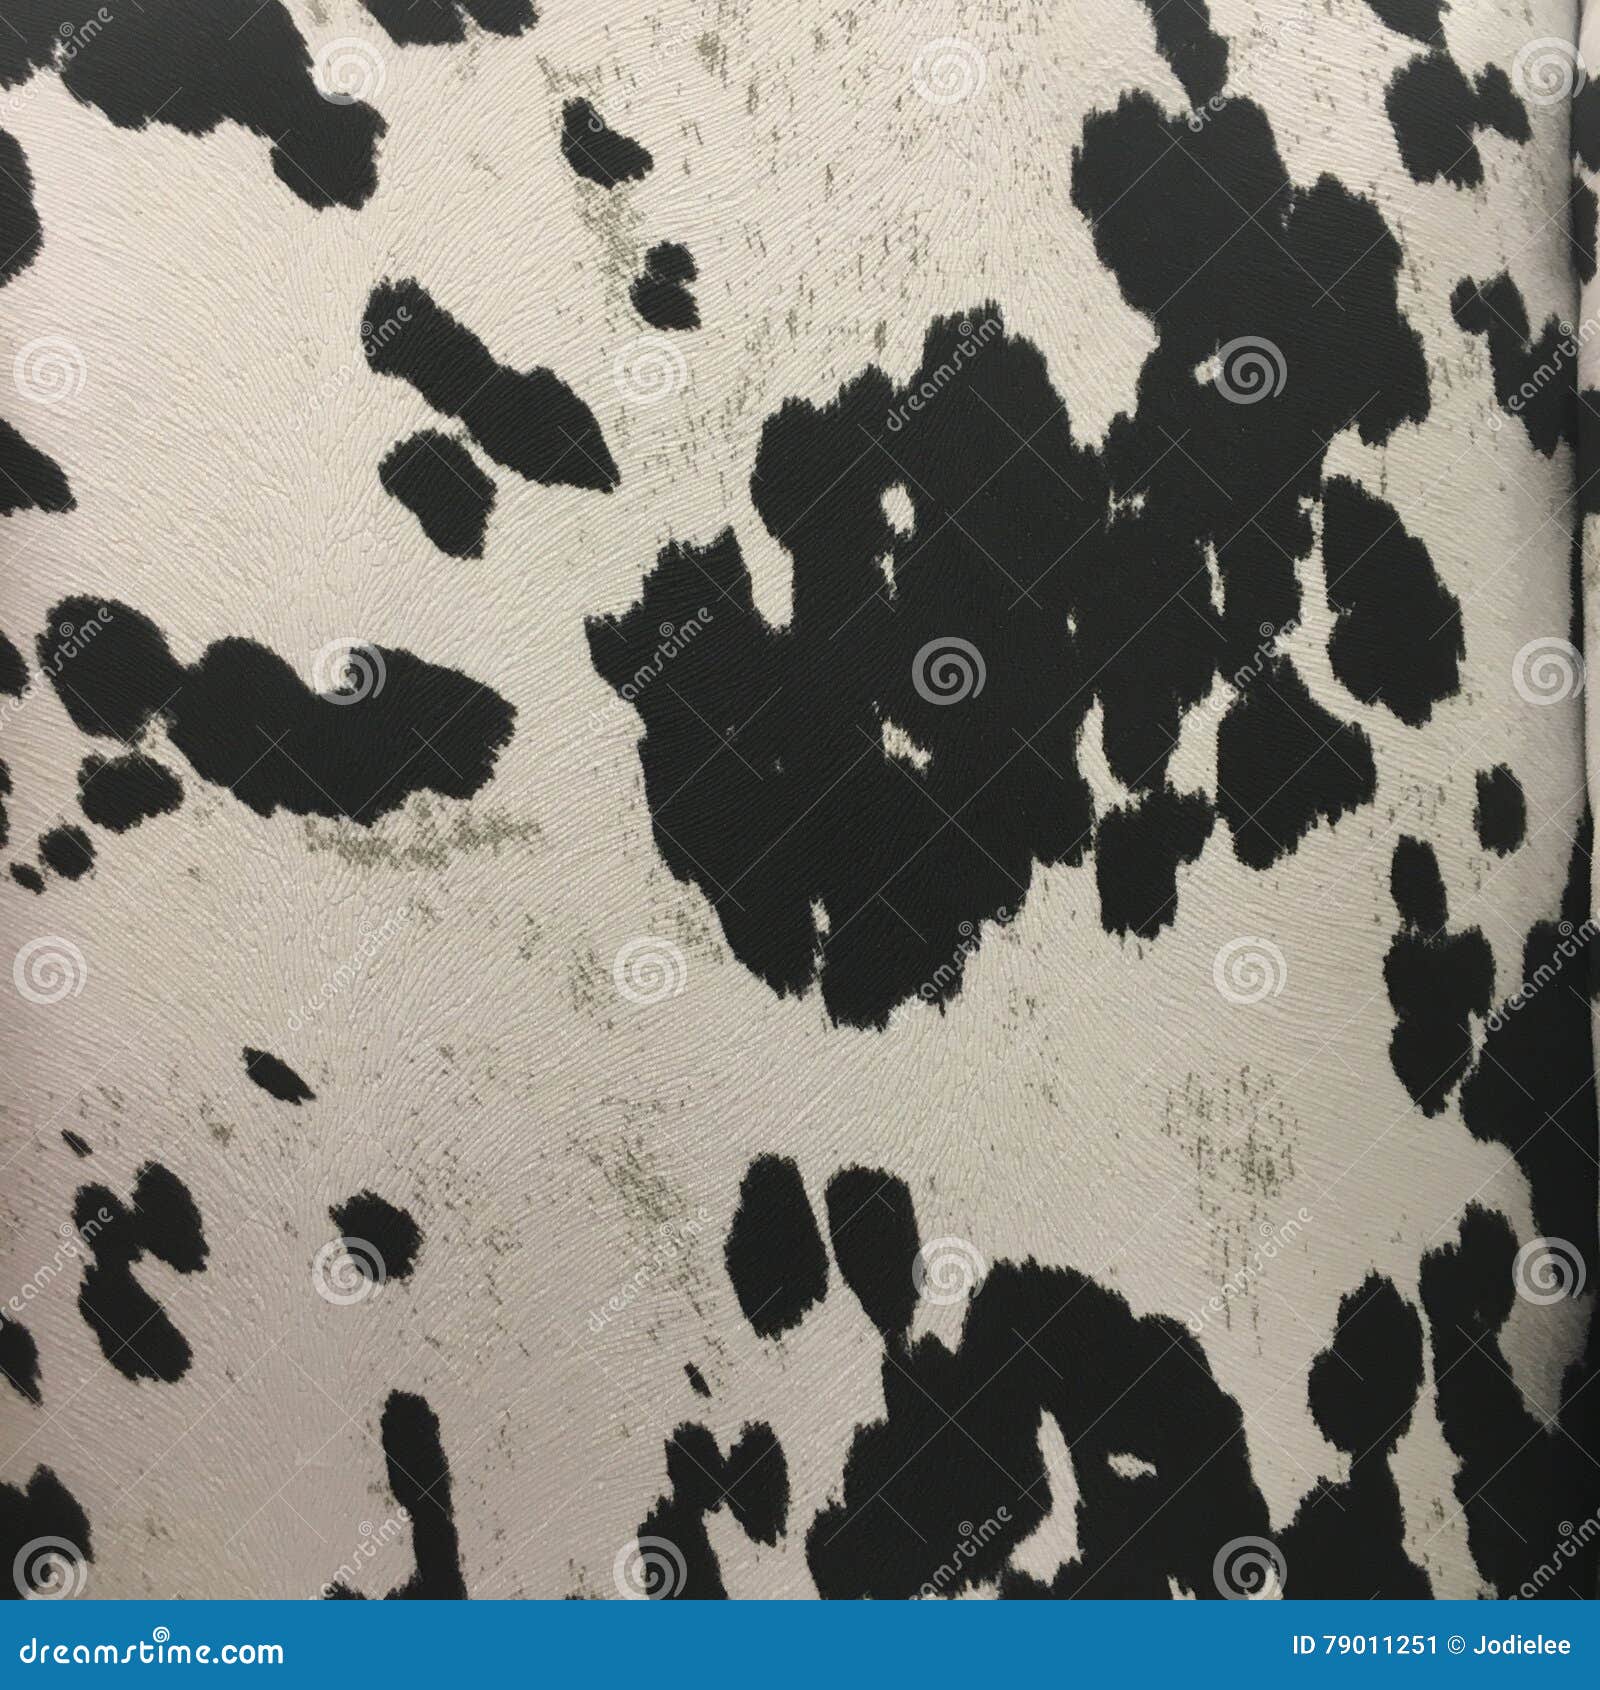 Cow Print Background Fabric Pattern Stock Image Image Of Animal